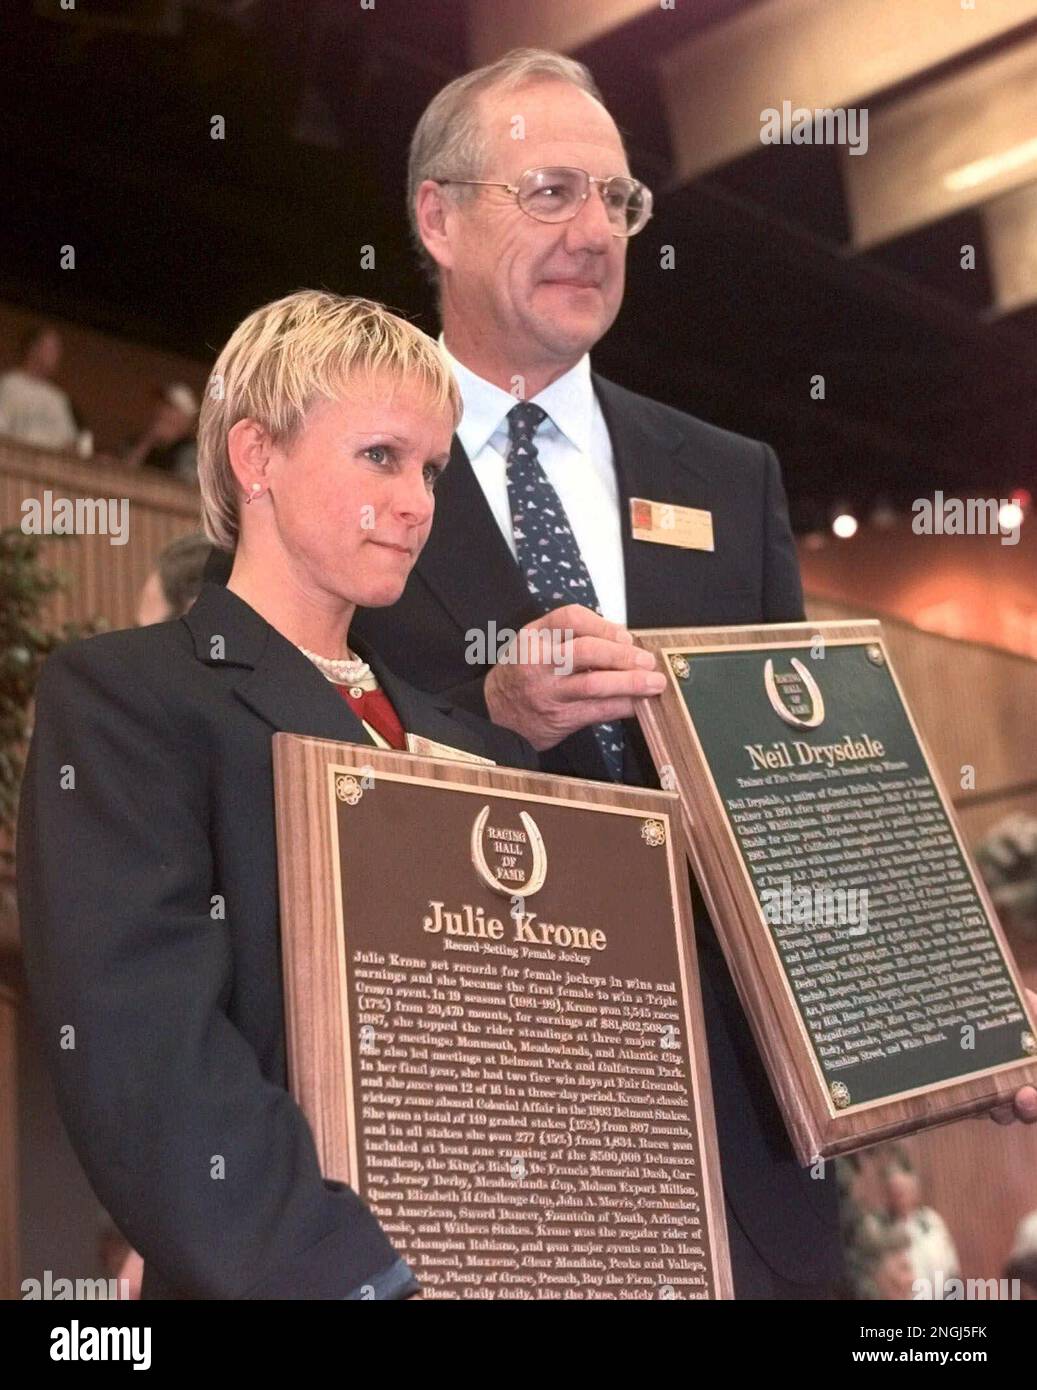 Julie Krone, the first woman jockey to be inducted into the National Racing  Hall of Fame, holds her plaque as she and Neil Drysdale, a trainer who was  inducted, pose on Monday,